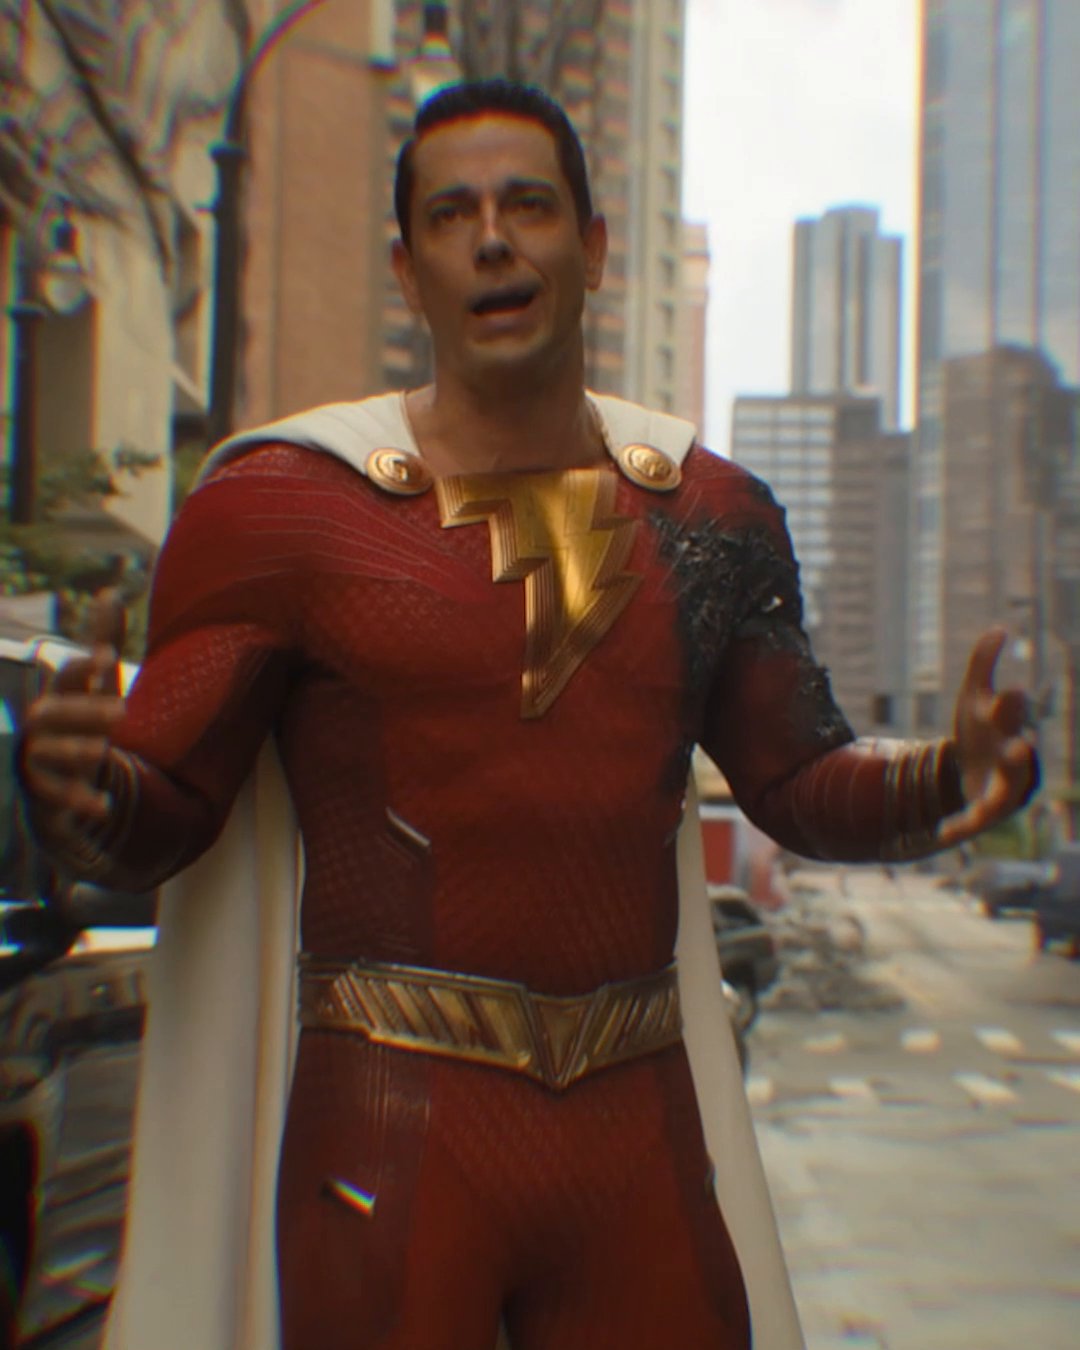 Shazam! Fury of the Gods Trailer, Check out the official trailer for Shazam!  Fury of the Gods – in theaters this Christmas. #ShazamMovie #SDCC2022, By  Rotten Tomatoes